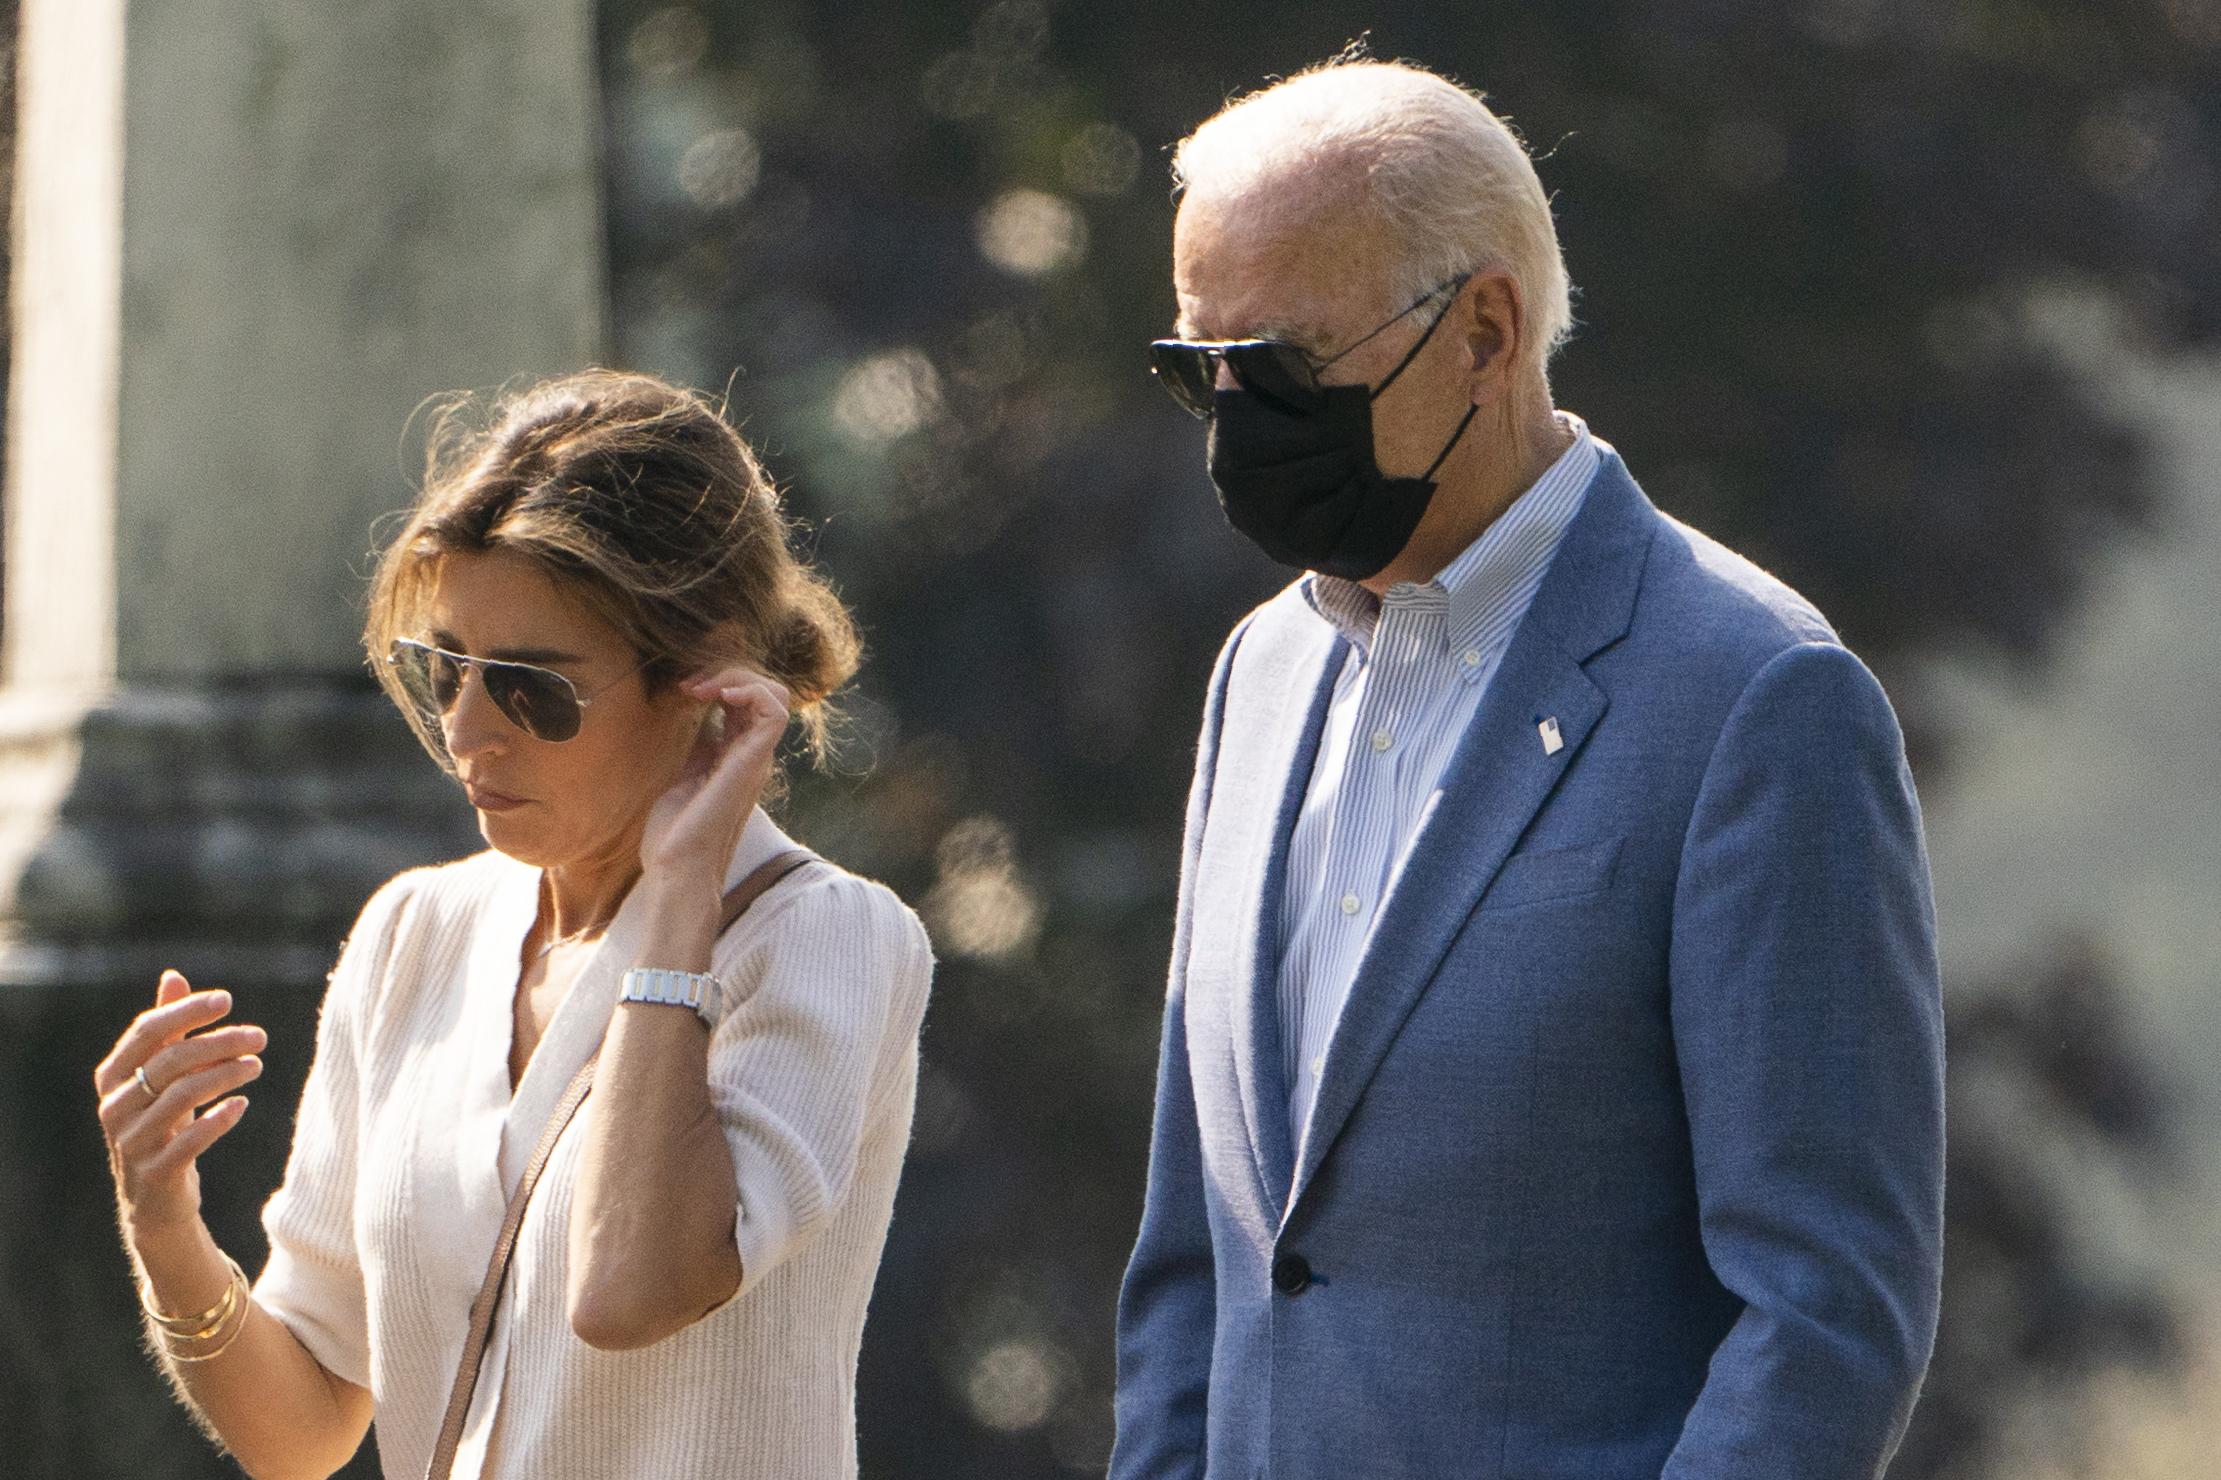 Tether indelukke Wrap House committee exposes China-linked payments to Hunter Biden, Hallie Biden  - Washington Times